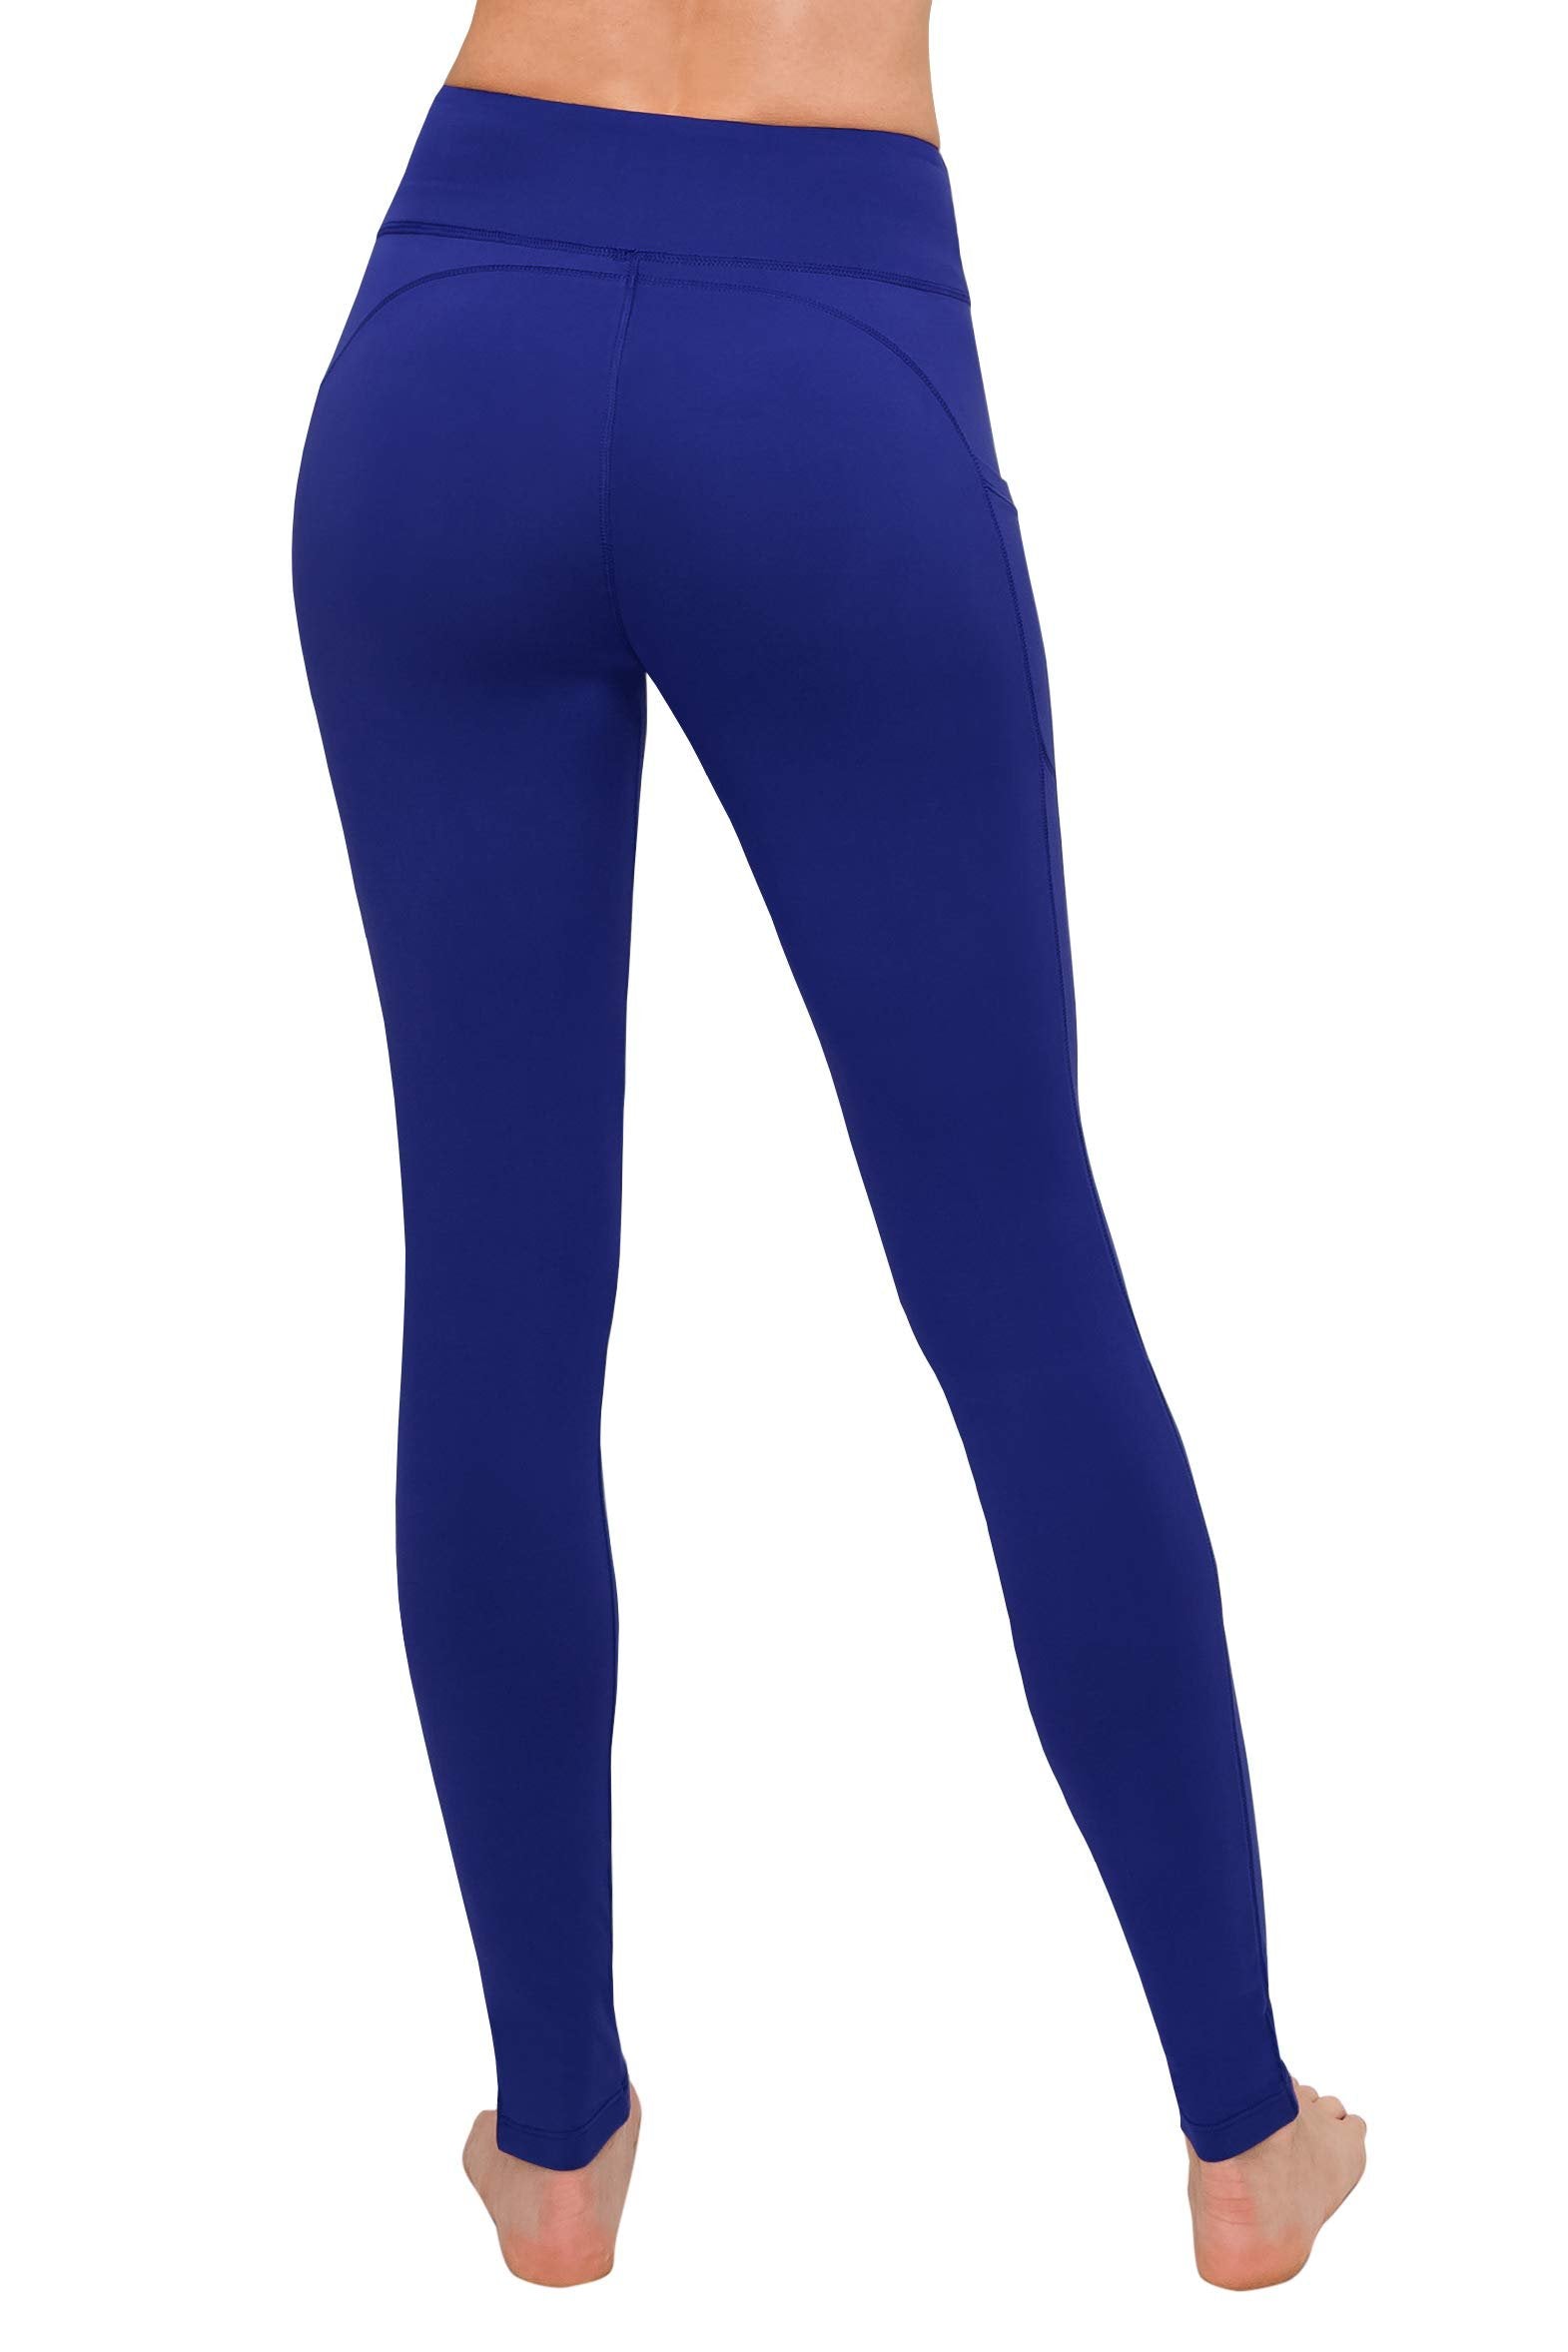 SATINA Women's High Waisted Leggings with Pockets - 3 Inch Waistband - Royal Blue - Regular/Plus Size - Free Shipping & Returns